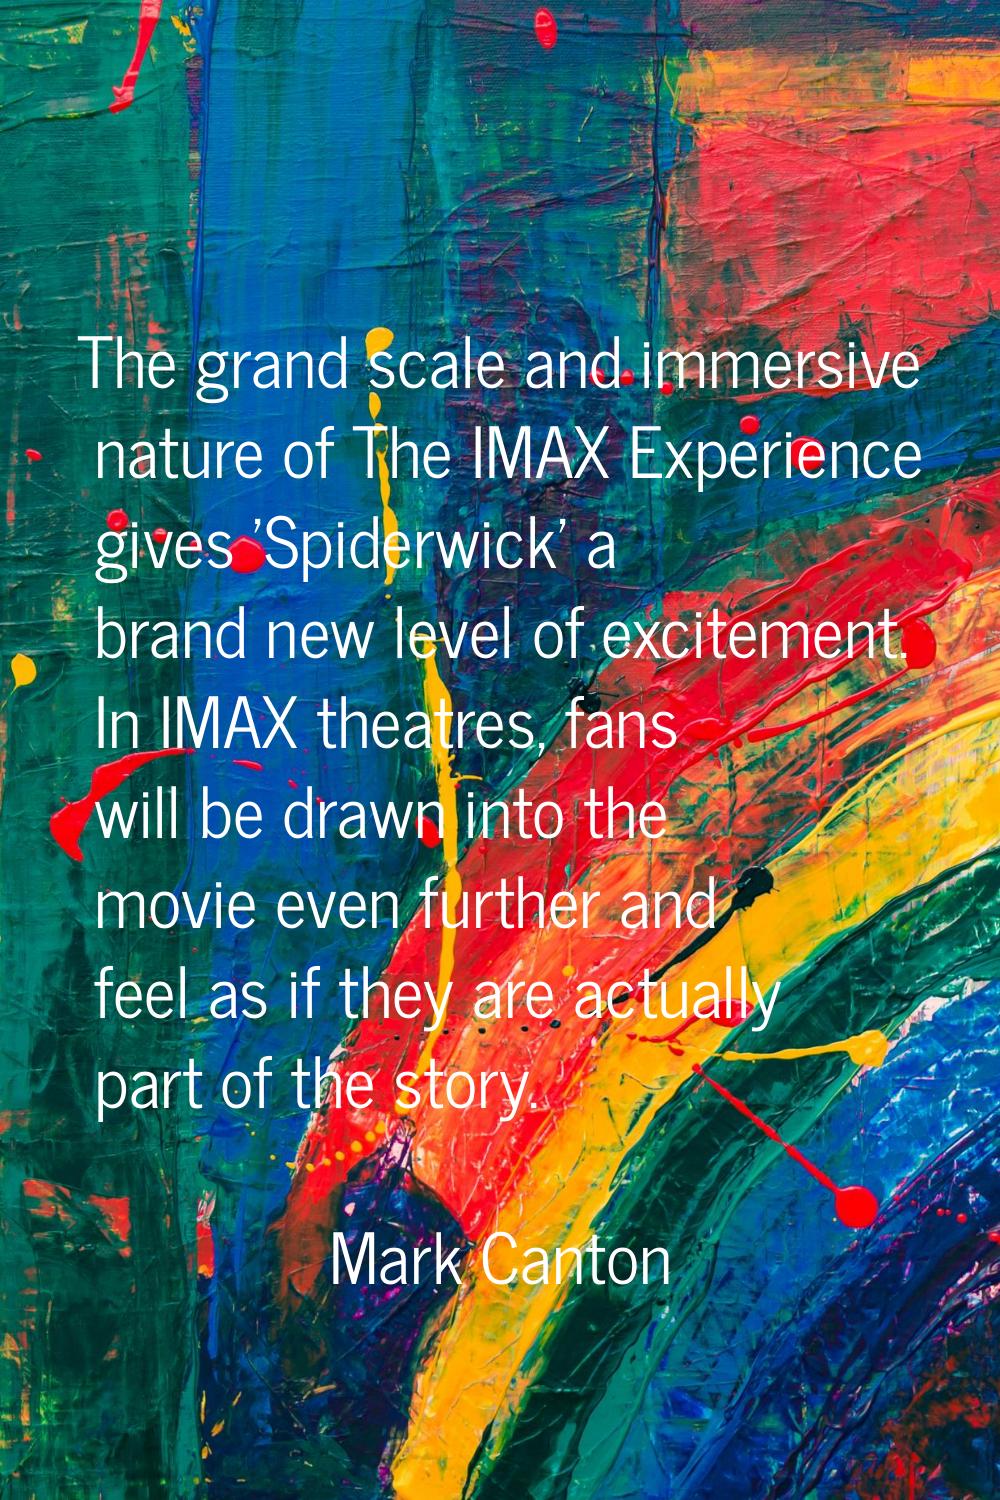 The grand scale and immersive nature of The IMAX Experience gives 'Spiderwick' a brand new level of